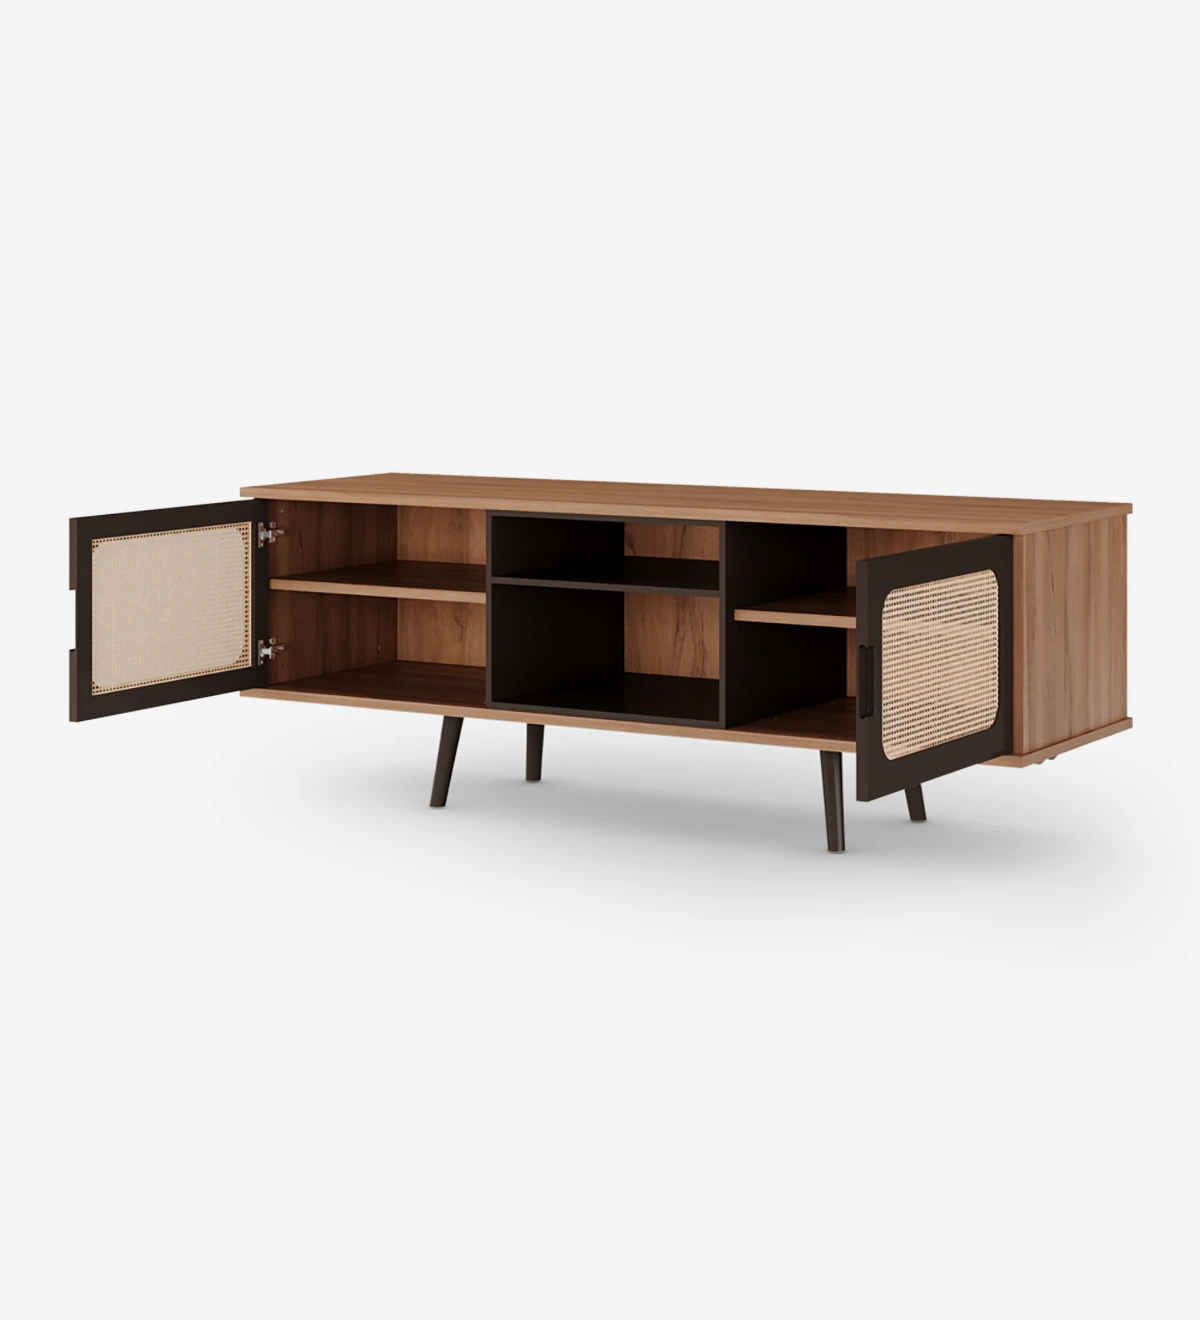 Malmo TV stand 2 doors, rattan detail, dark brown lacquered module and feet, walnut structure, 160 x 58,8 cm.